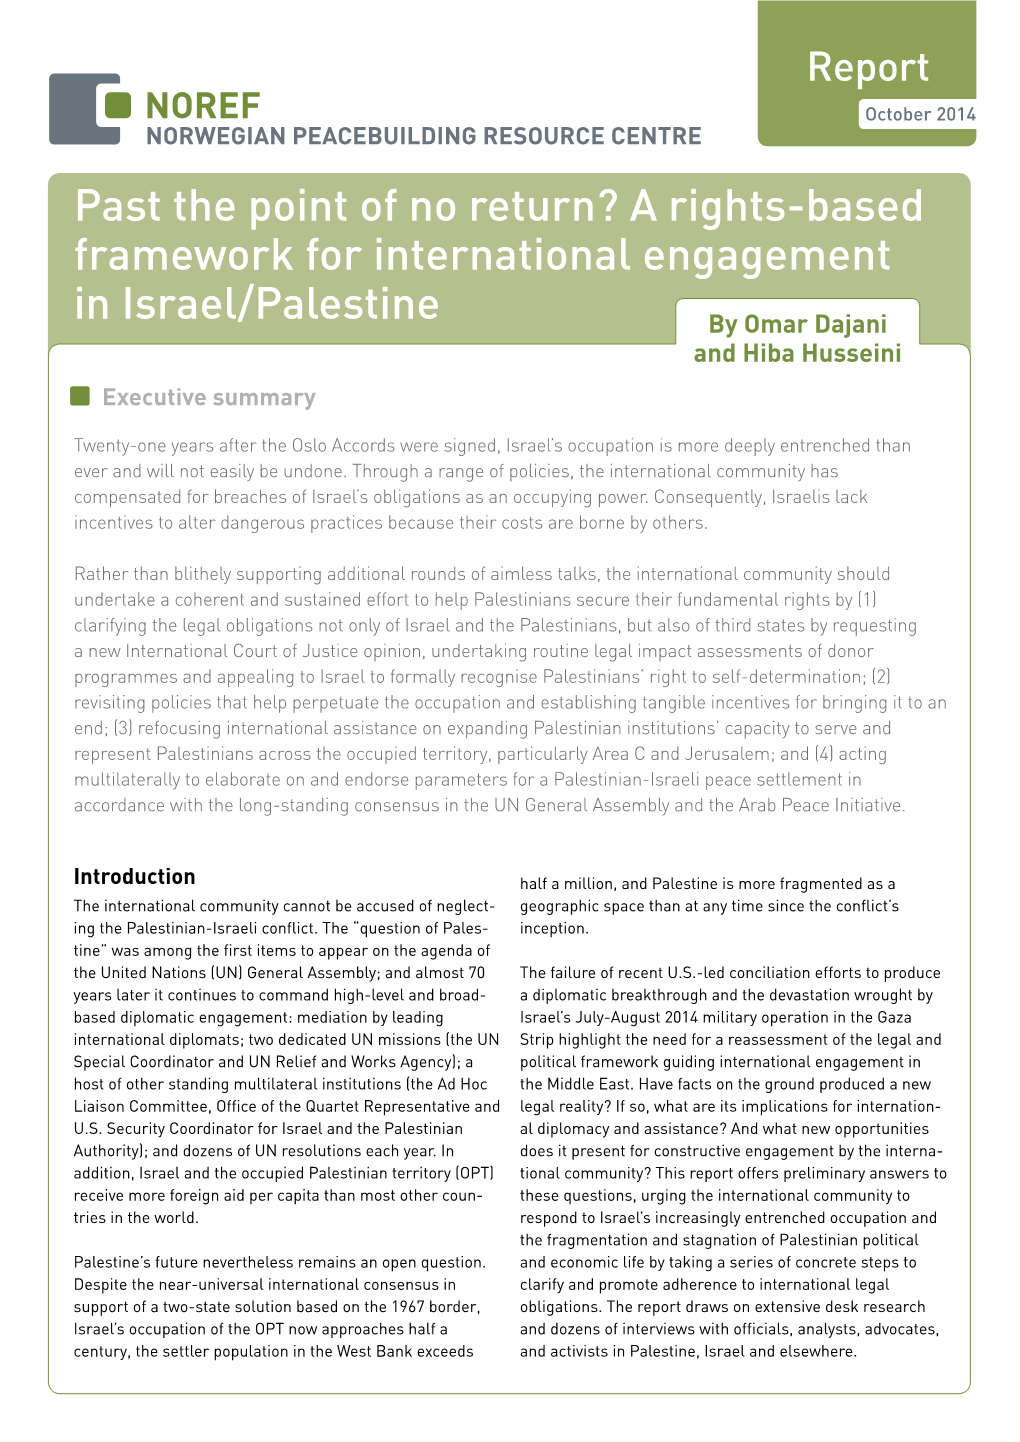 Past the Point of No Return? a Rights-Based Framework for International Engagement